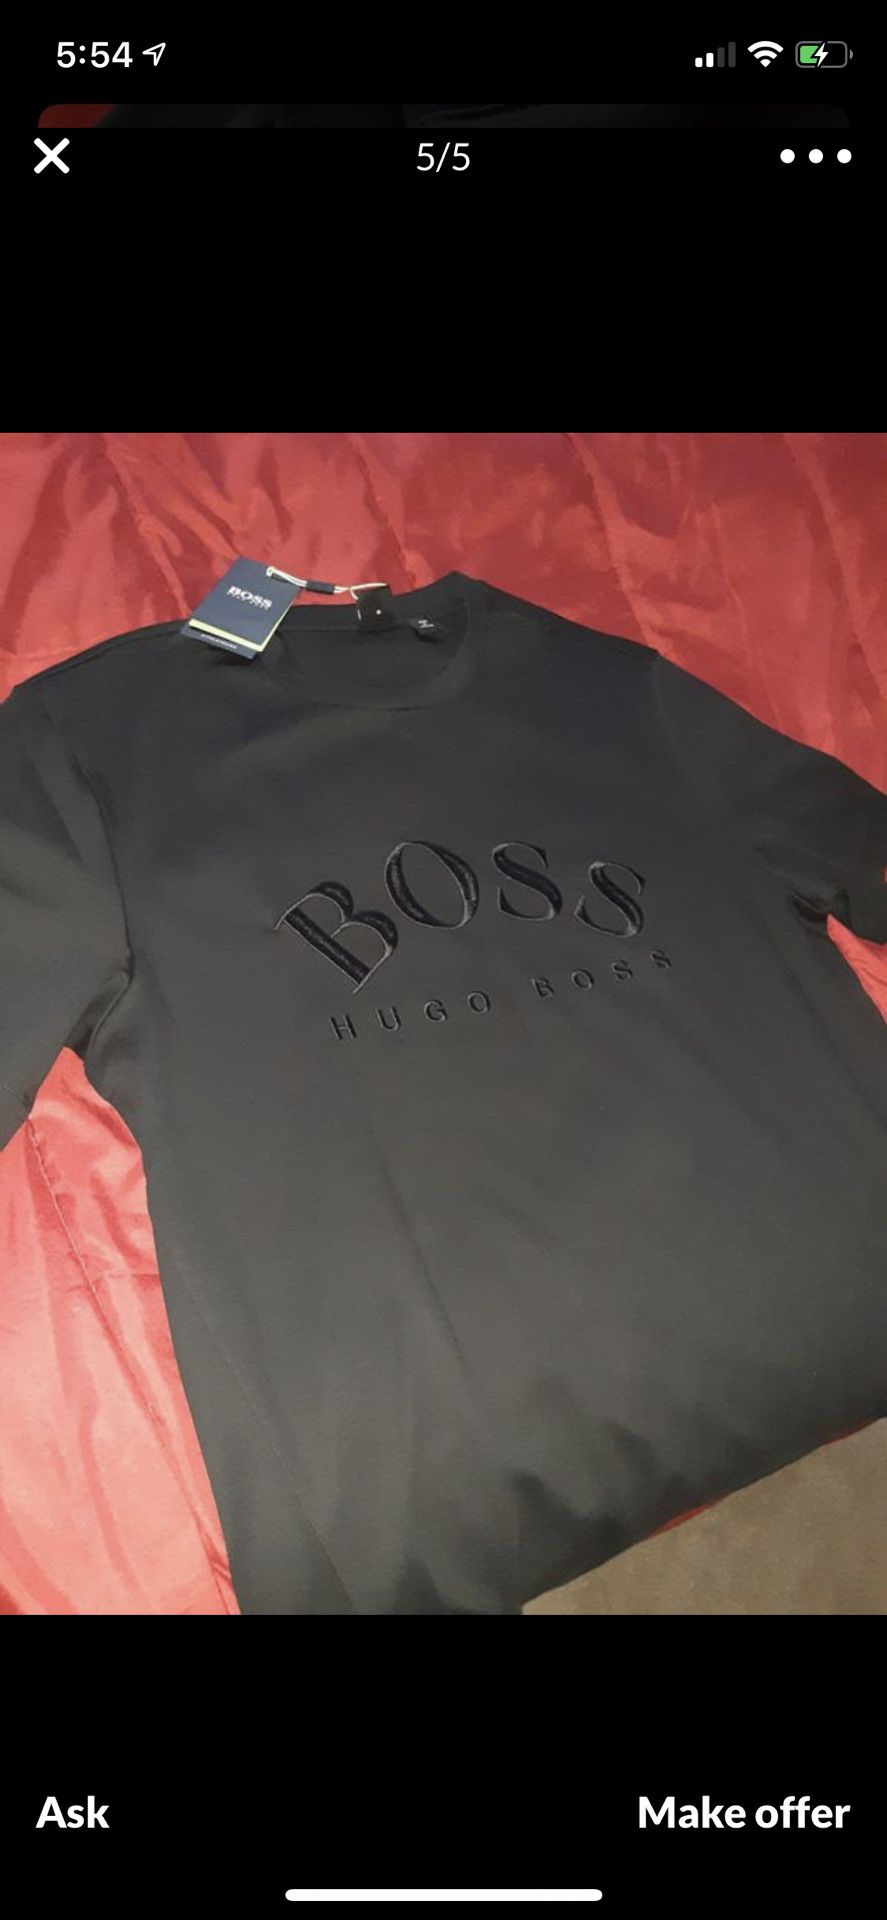 Men’s 2019 hugo boss tee with tags Never worn